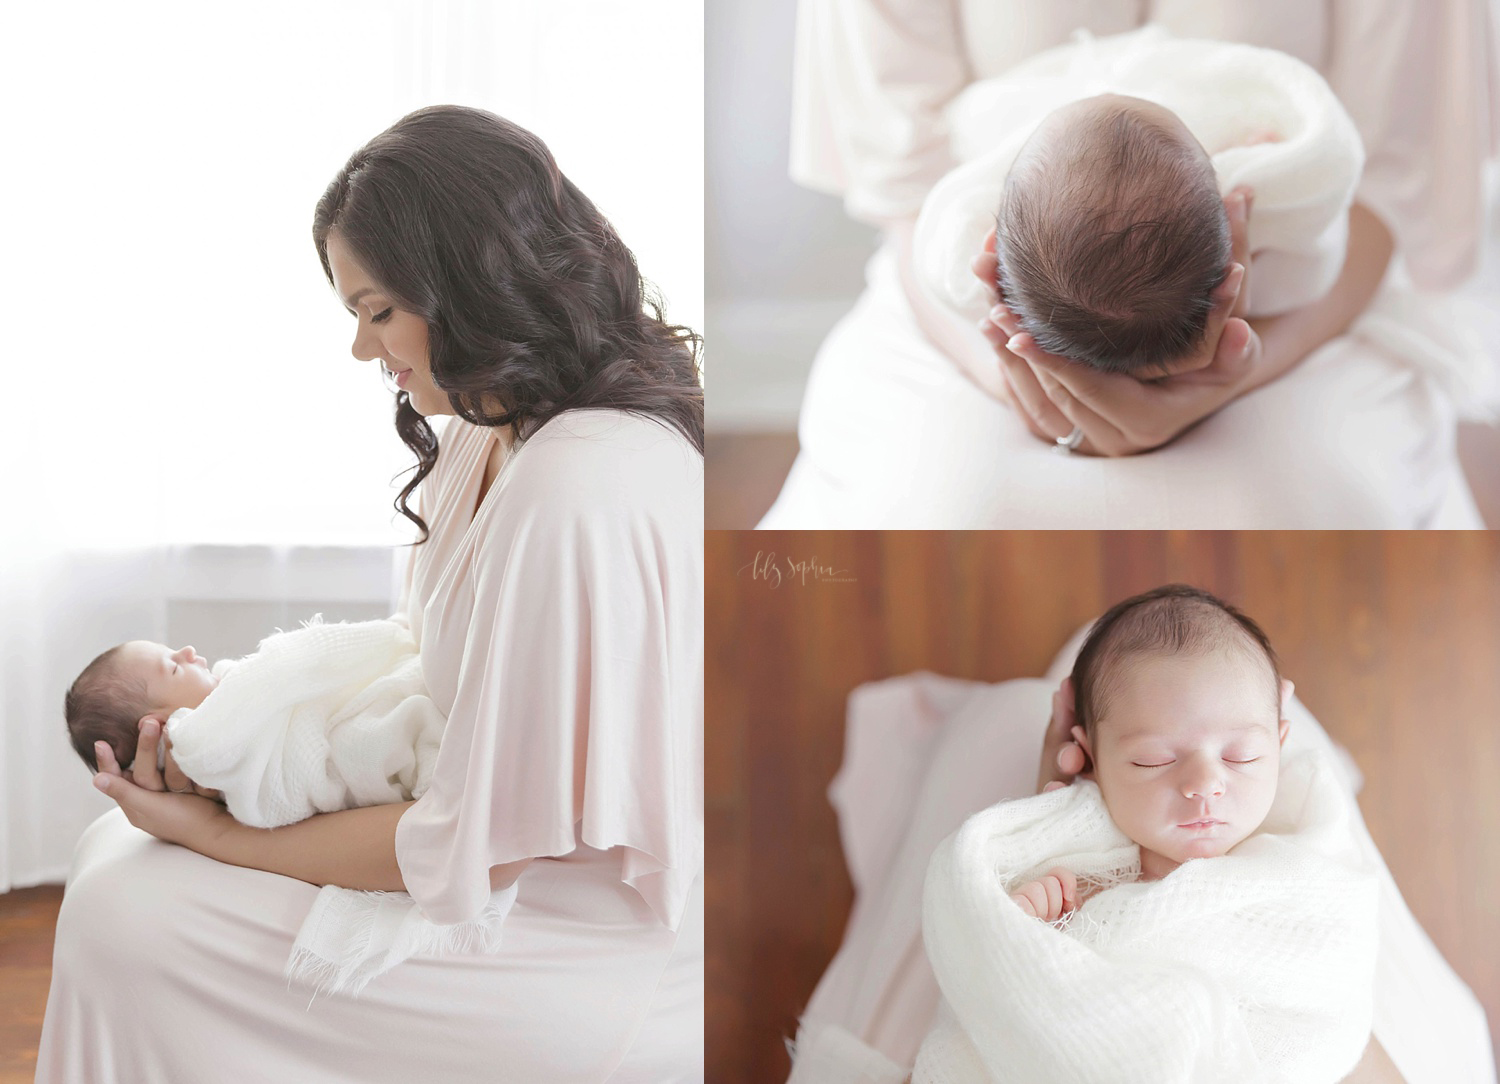  Image collage taken at different angles, of a mother holding her sleeping, newborn, infant, daughter while sitting on a chair.&nbsp; 